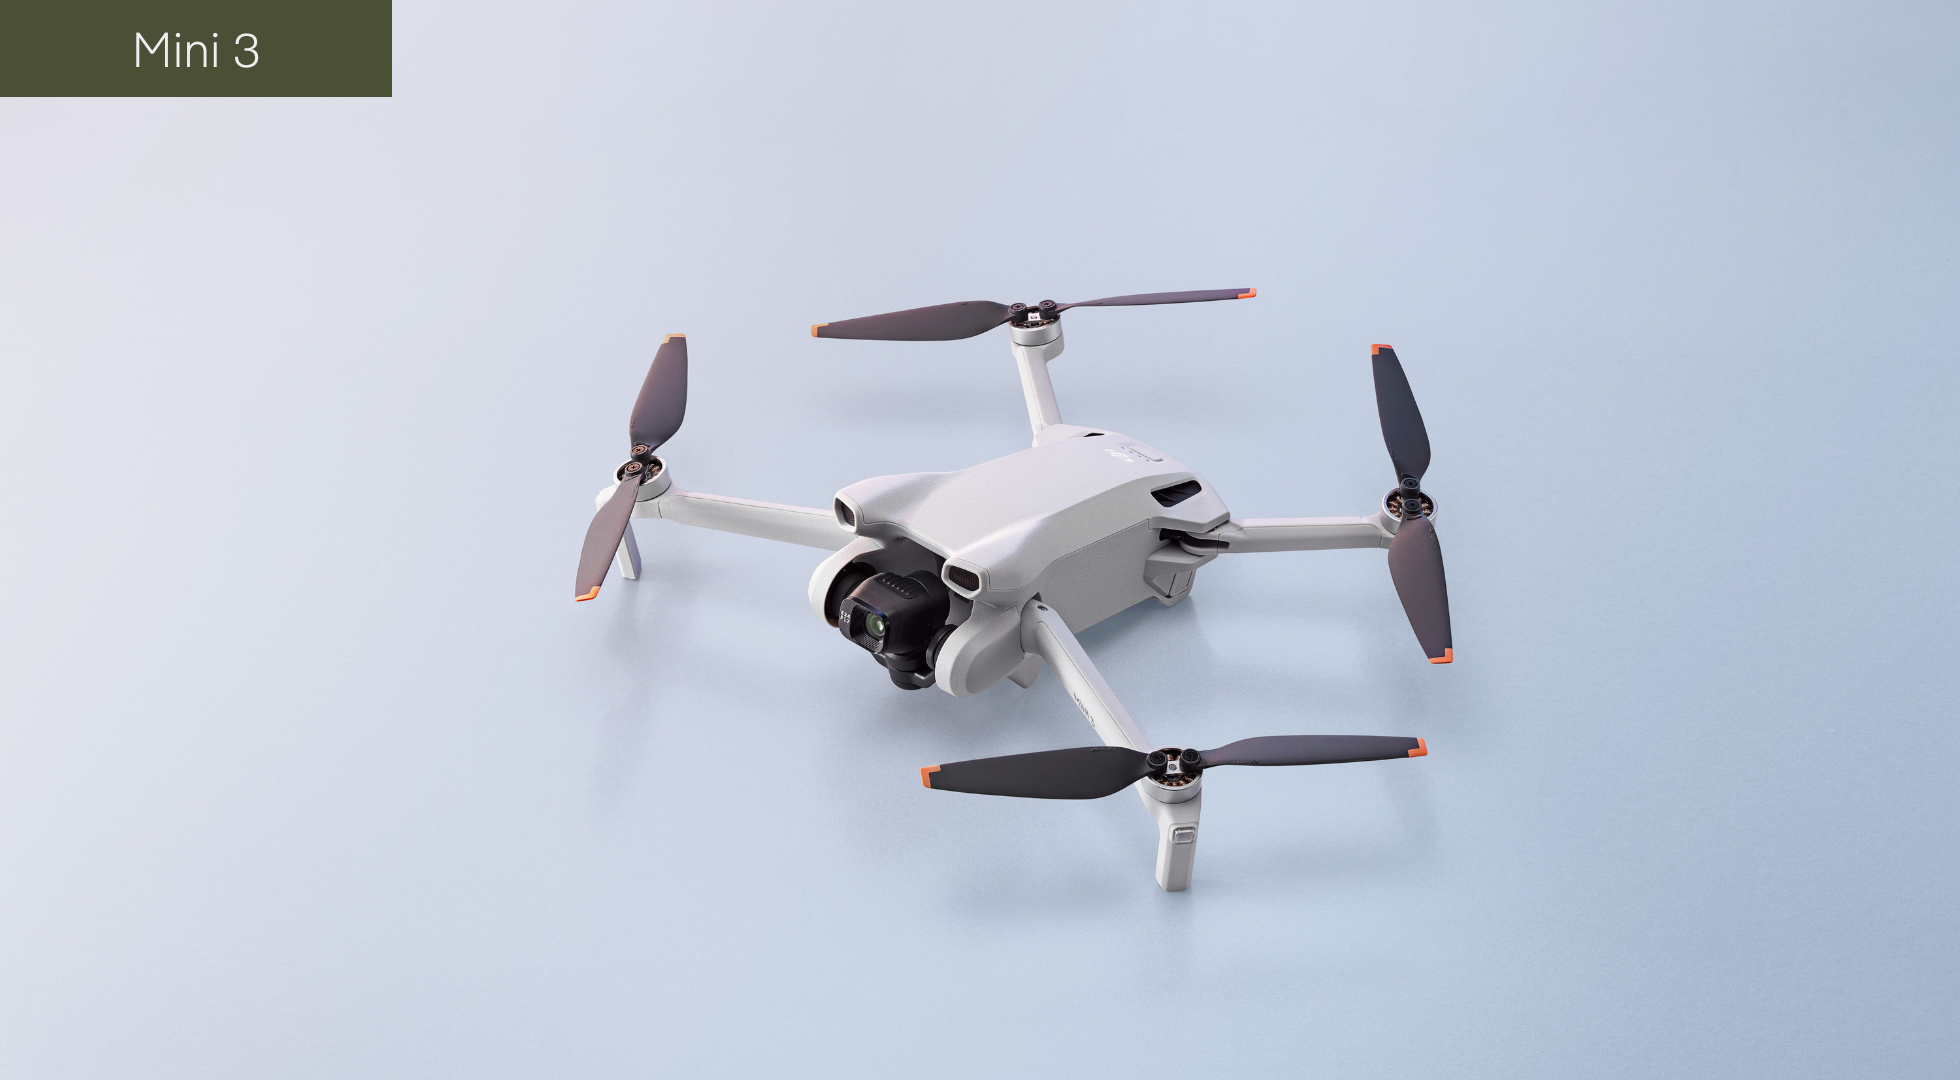 DJI's Mini 3 drone is cheaper, but more limited than the Pro model